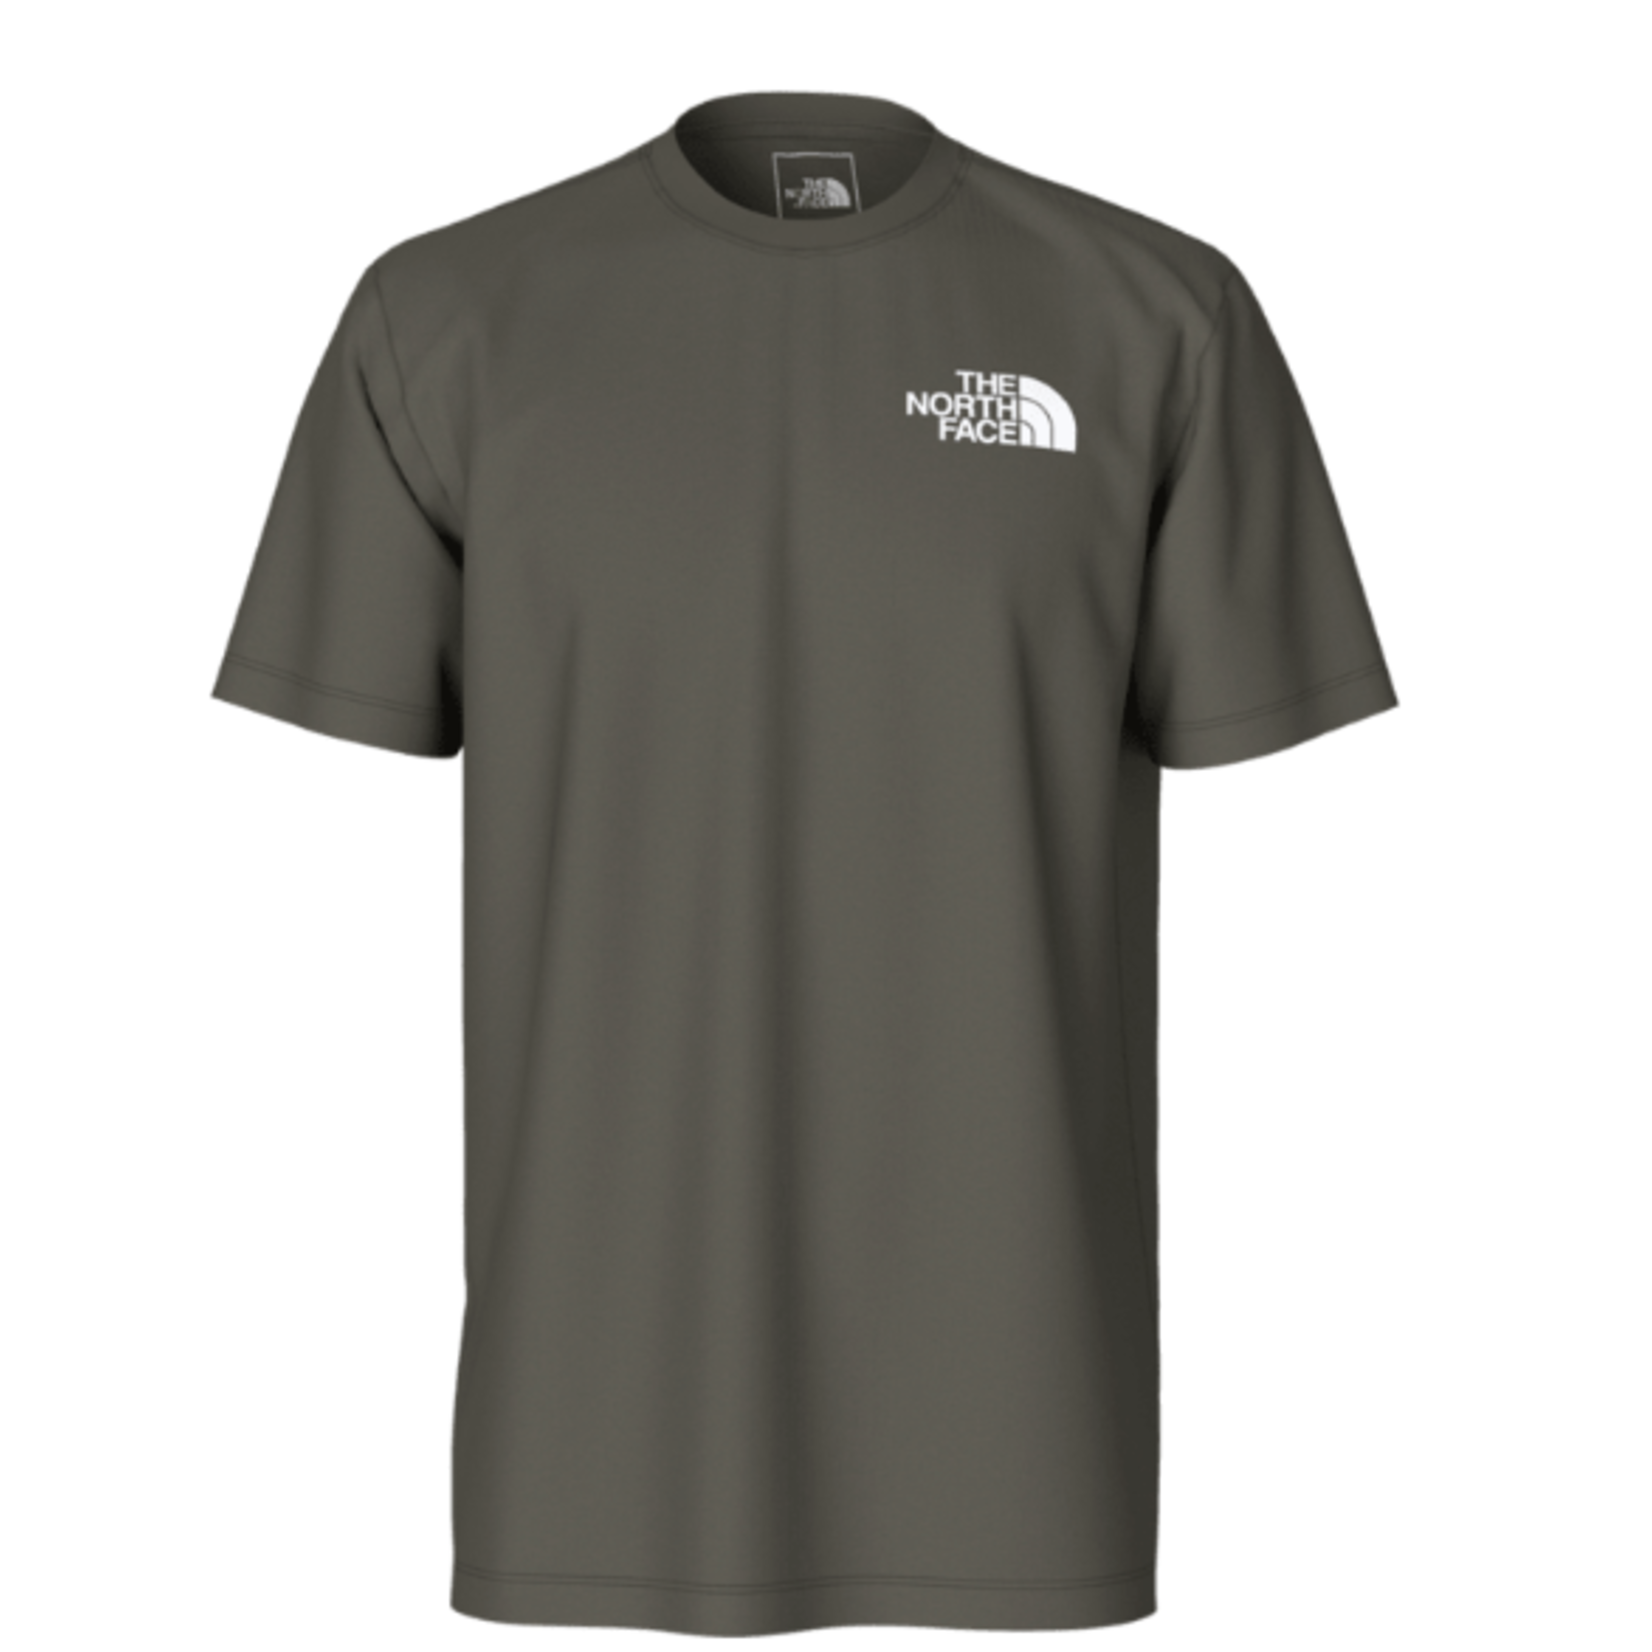 The North Face The North Face T-Shirt, S/S Box NSE Tee, Mens